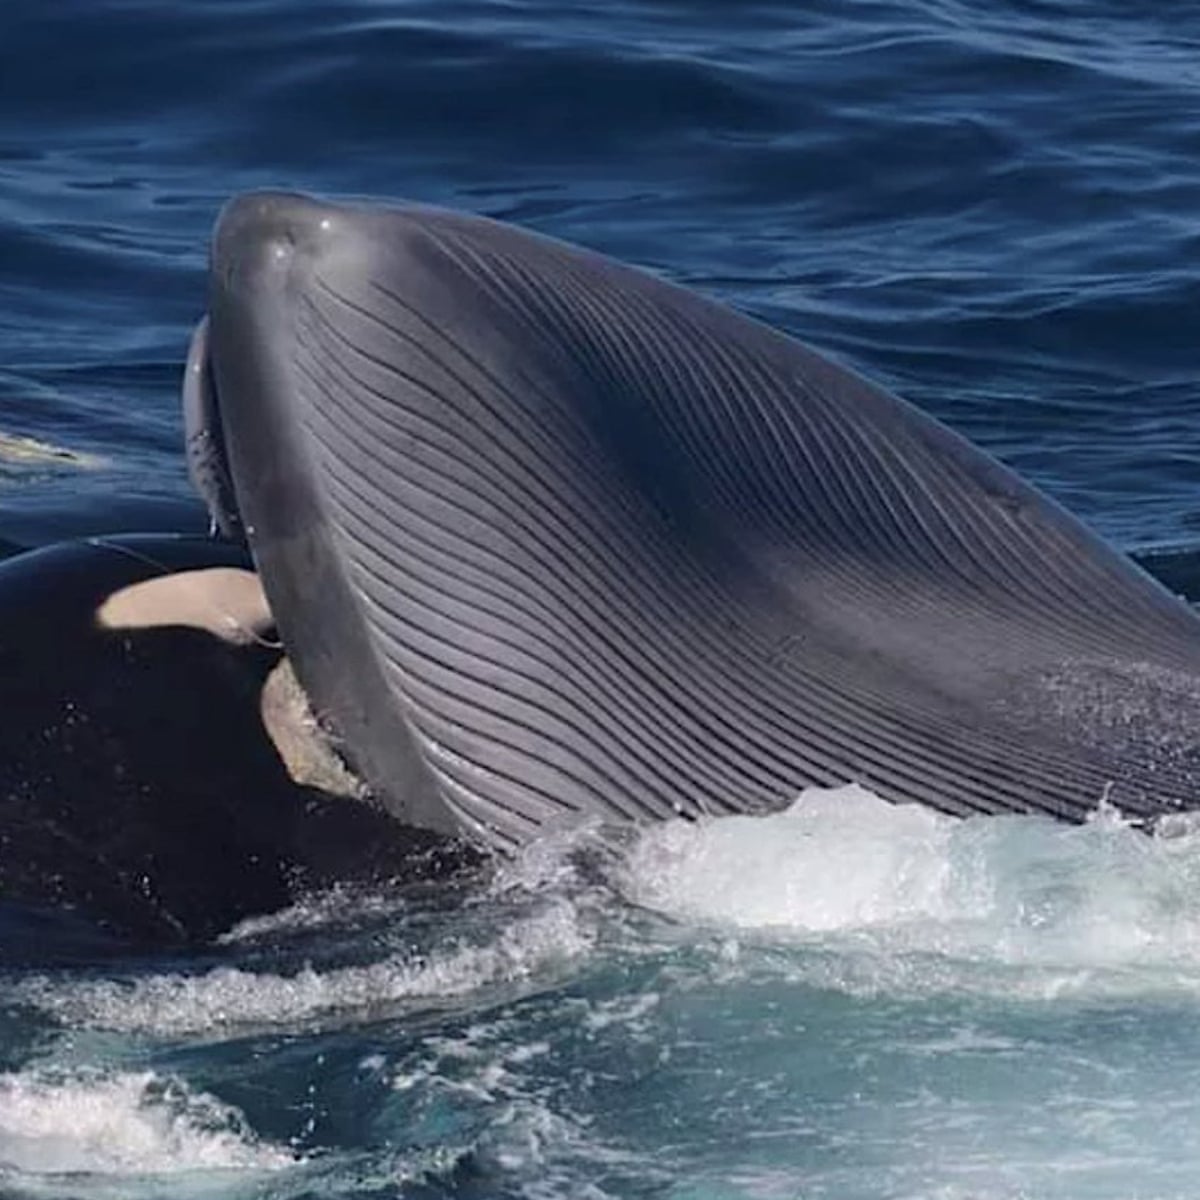 Orcas recorded killing and feeding on blue whales in brutal attacks | Whales  | The Guardian